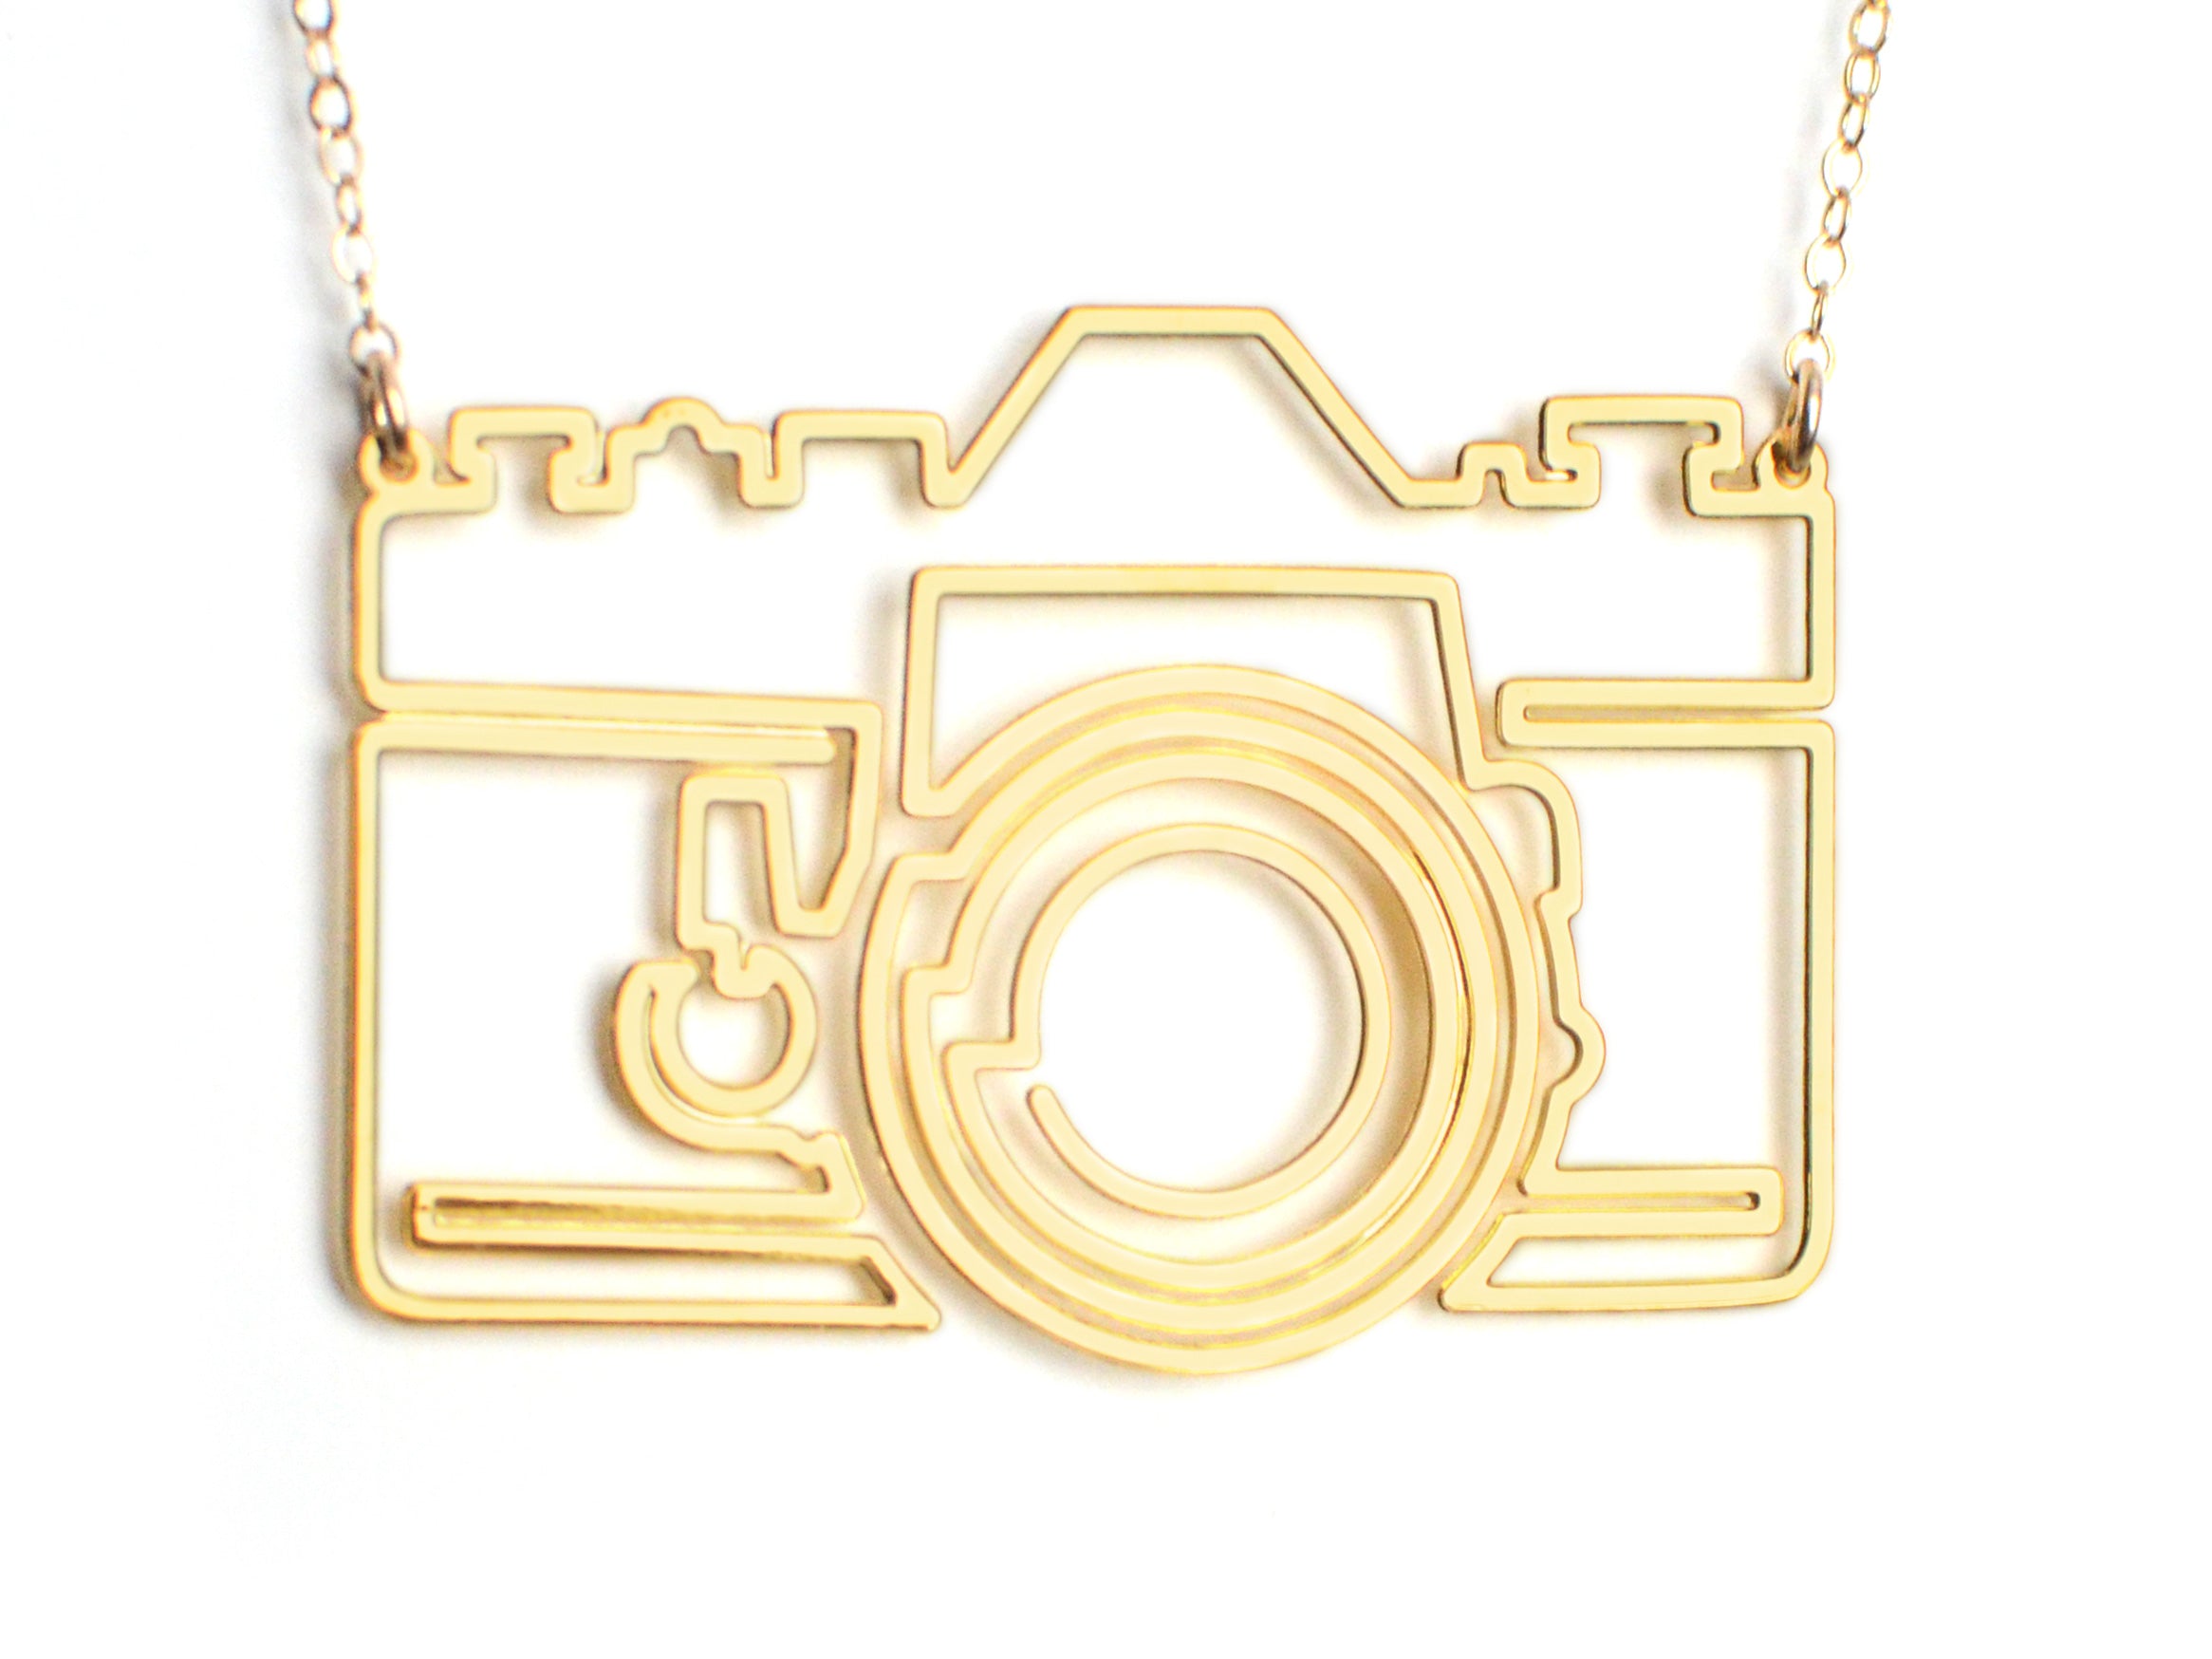 Photo Camera Necklace - High Quality, Affordable, Hand Drawn, Courageous Creators Necklace - Available in Gold and Silver - Made in USA - Collaboration with Honto - Brevity Jewelry